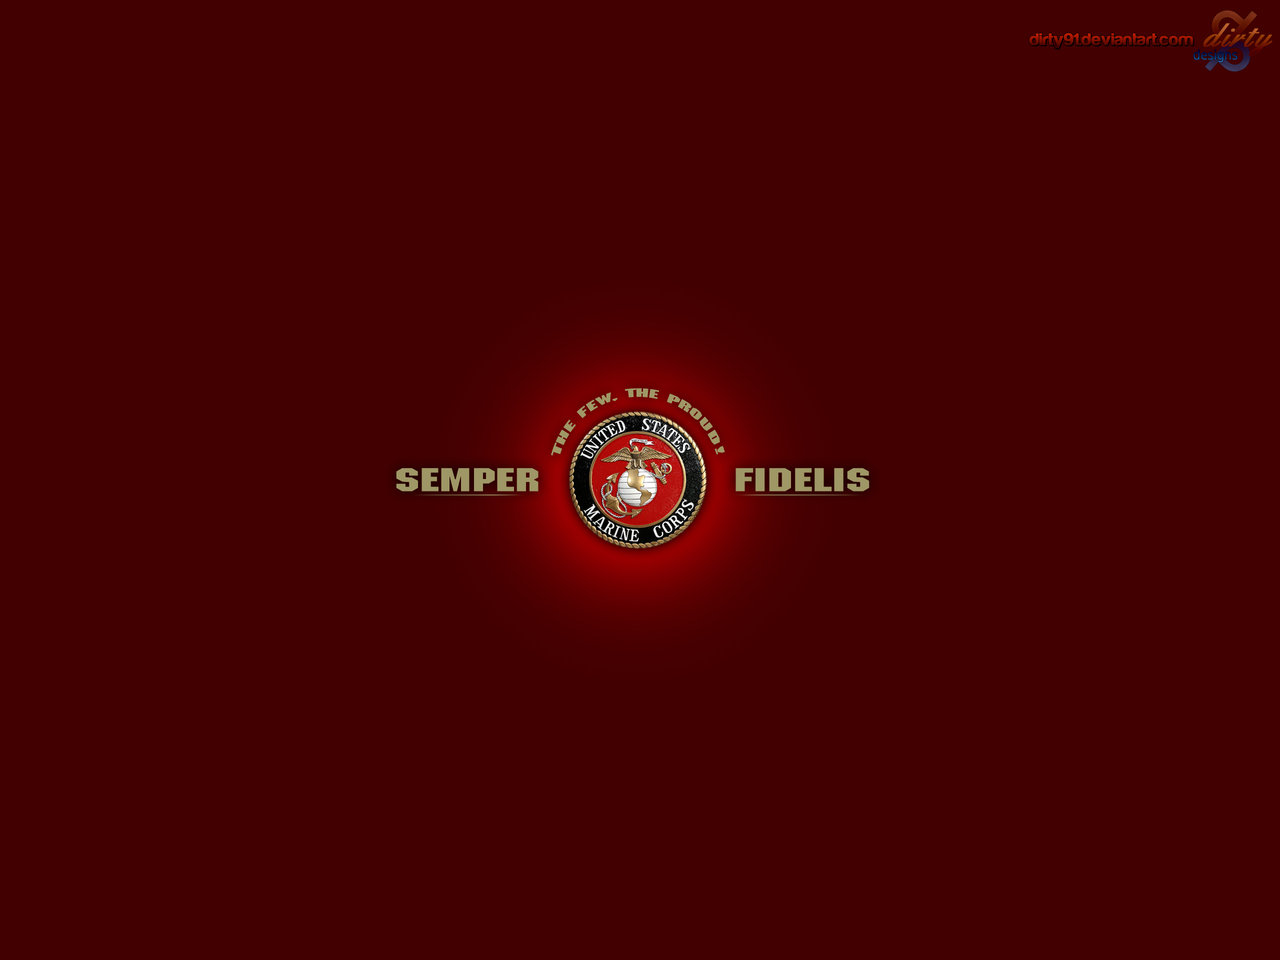 Usmc Wallpaper Now In HD By Dirty91